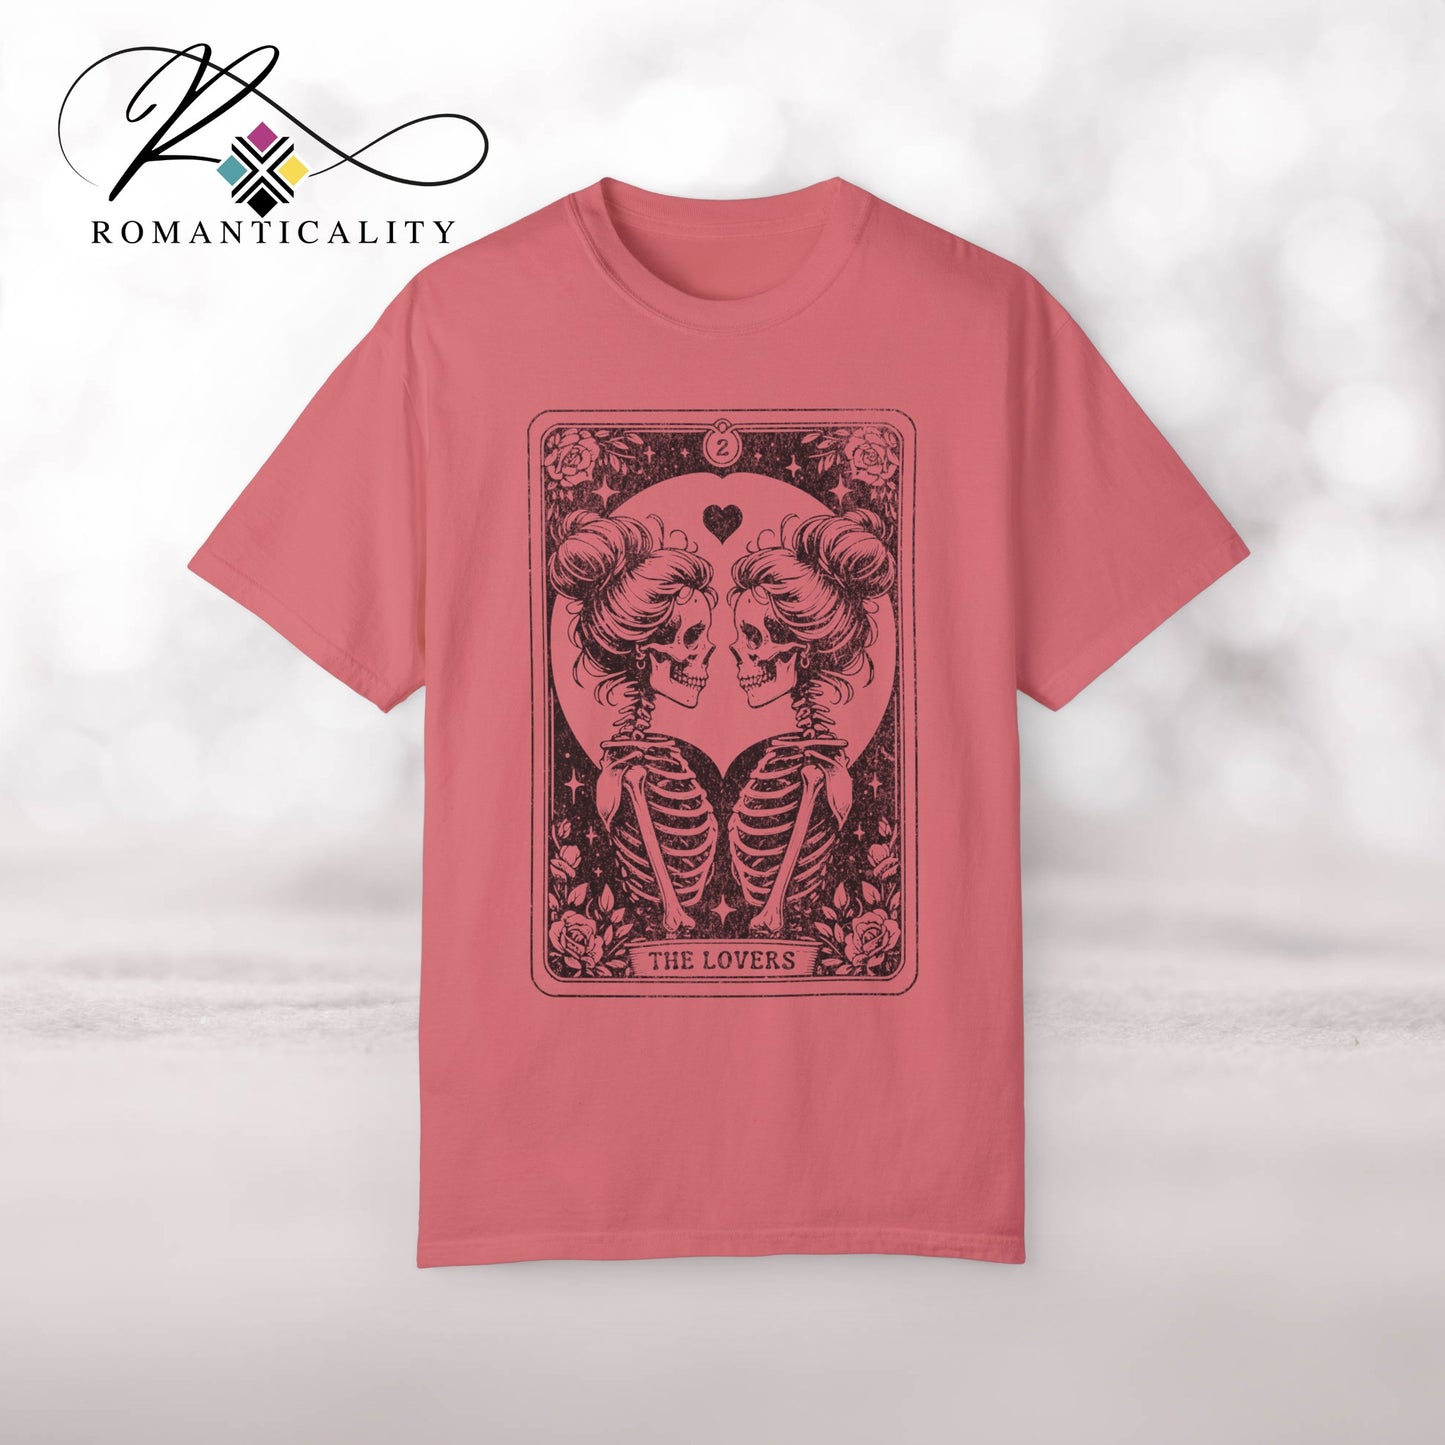 The LOVERS-Female Couple Tarot Card Graphic Tee-Women's T-Shirt-Mother's Day Gift-Giftful- LGBTQ Tarot Card Graphic T-shirt-Themed Top-Funny Quote Tee